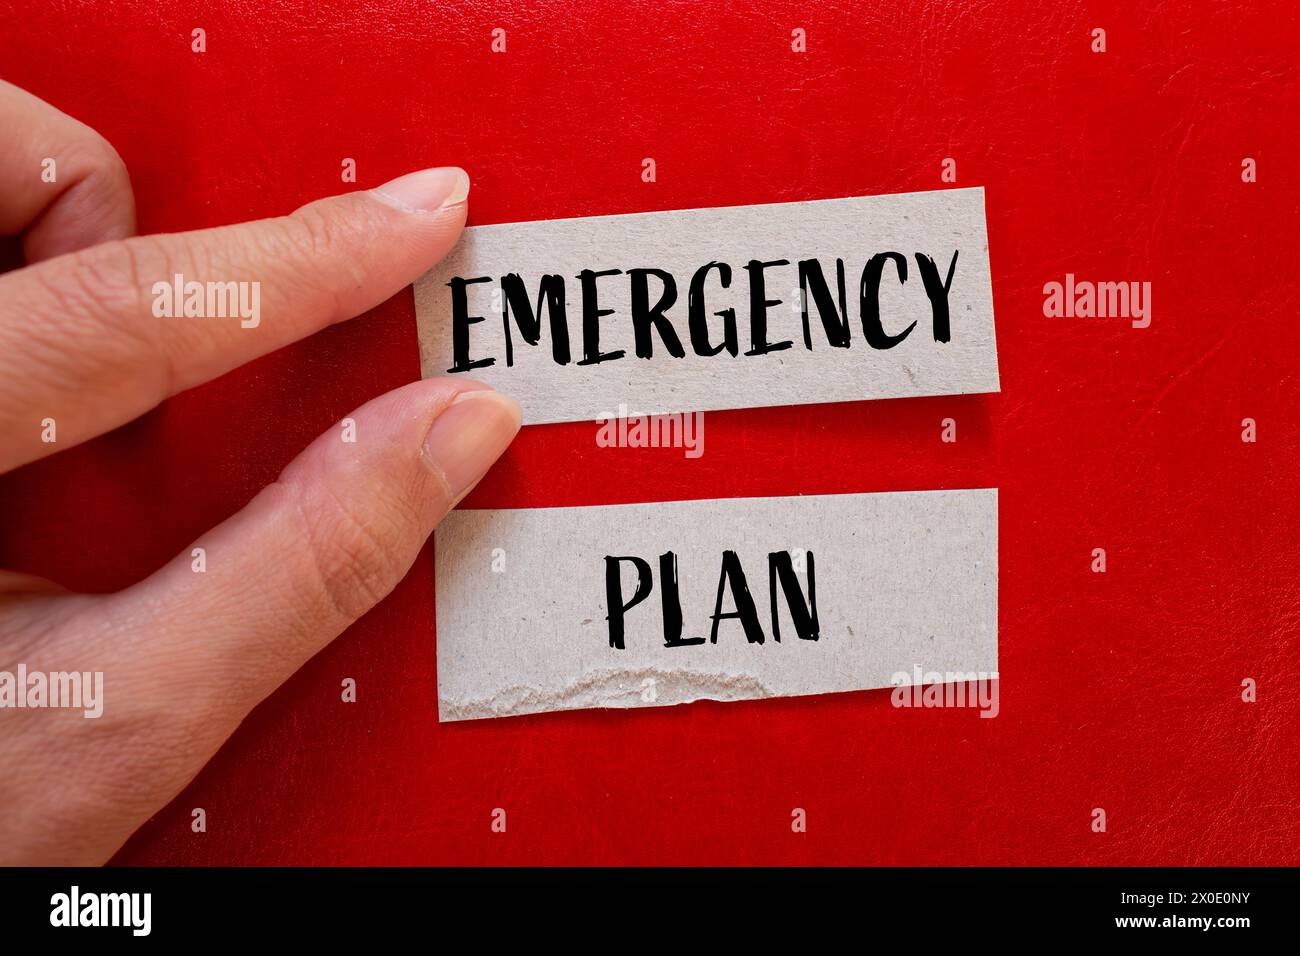 Emergency plan words written on paper pieces with red background. Conceptual symbol. Copy space. Stock Photo